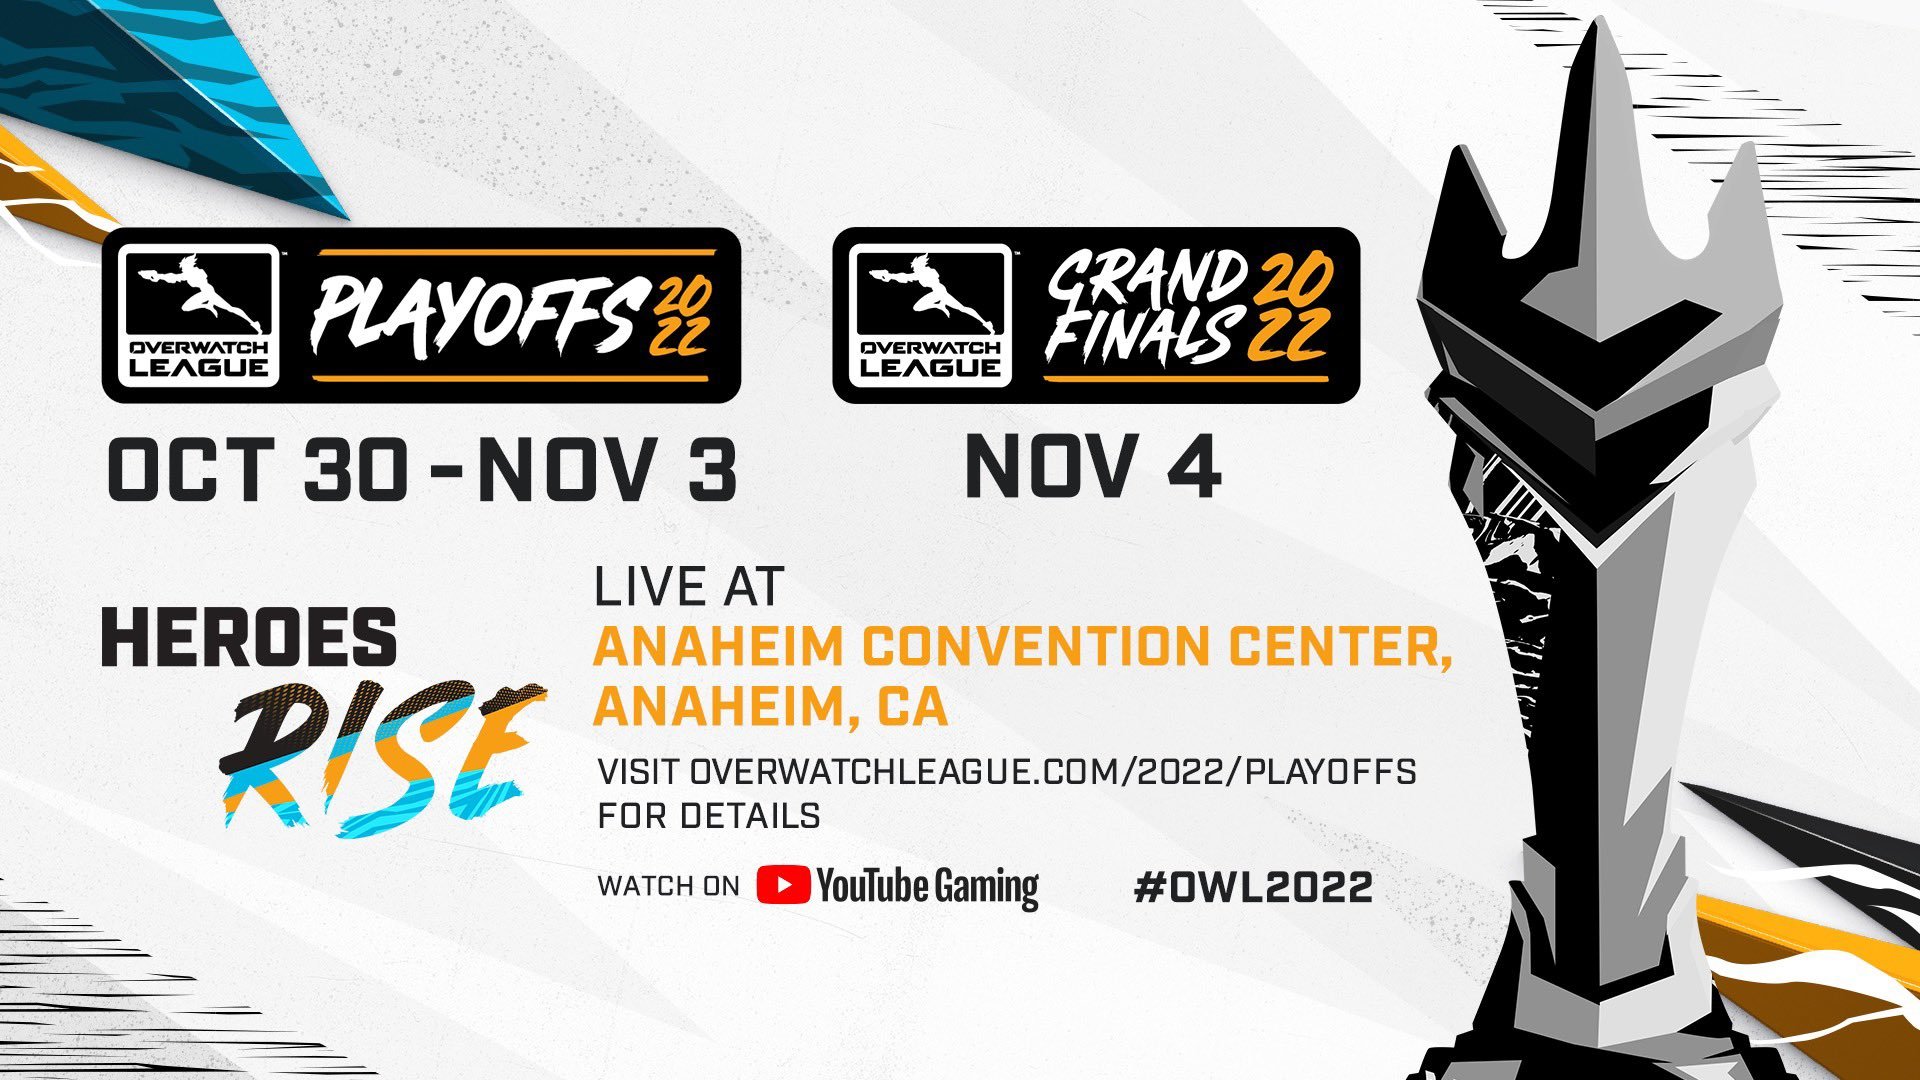 The Overwatch League is returning to Anaheim for its postseason - Overwatch 2